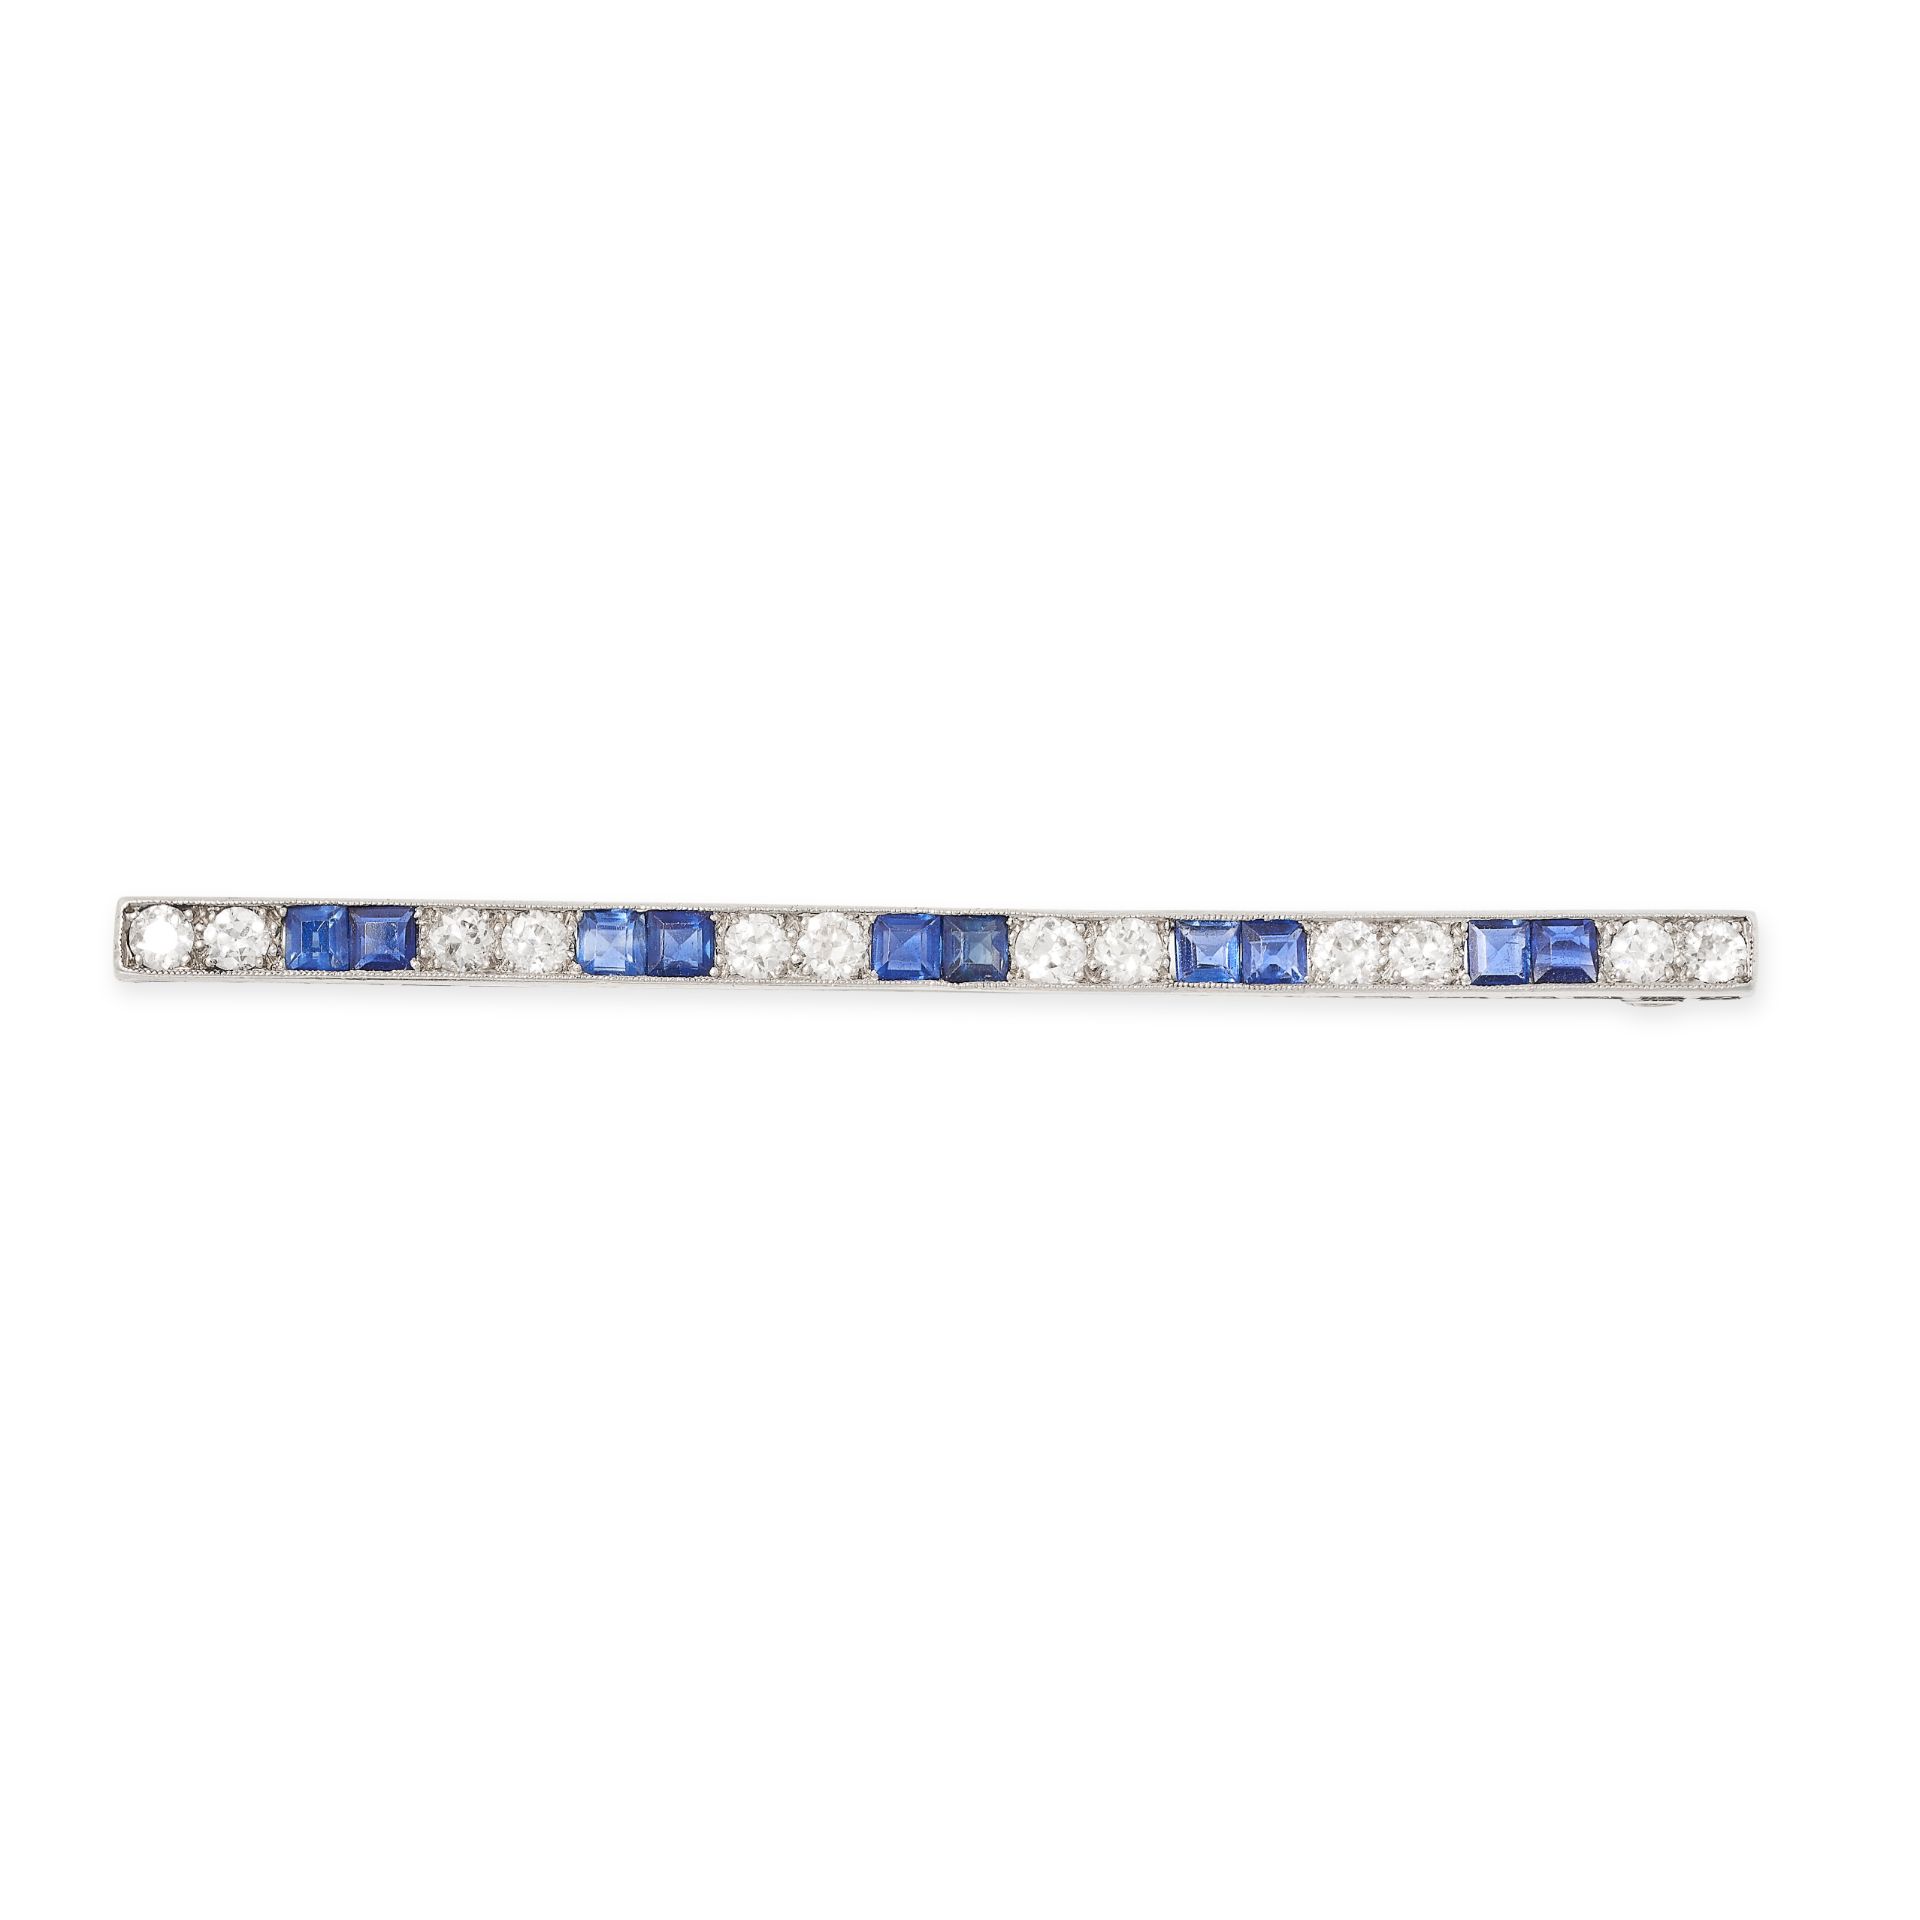 AN ART DECO SAPPHIRE AND DIAMOND BAR BROOCH set with alternating pairs of Old European cut